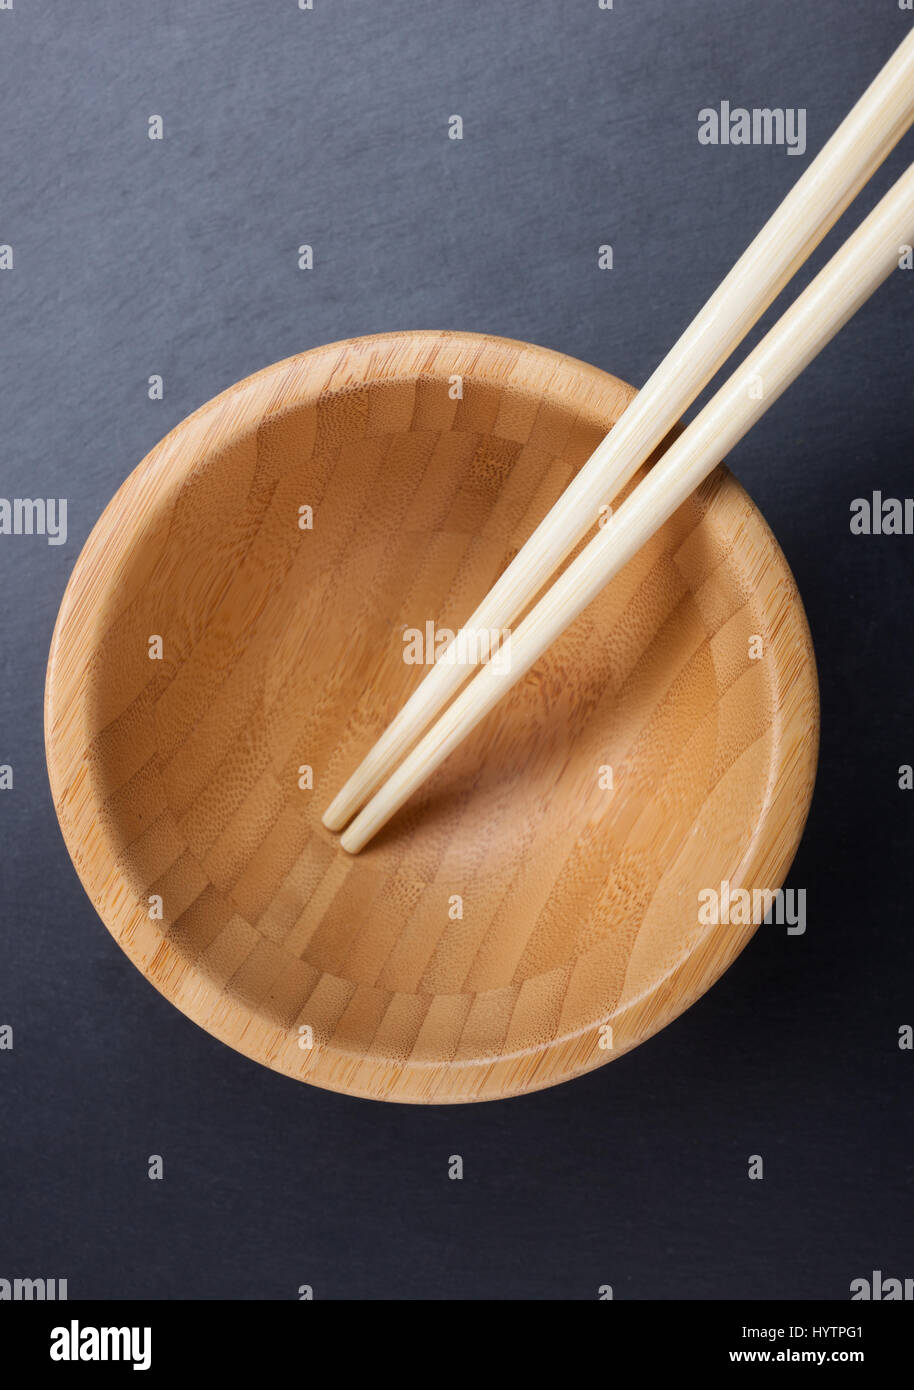 Chinese chopsticks with empty wooden bowl on sblack late. Stock Photo